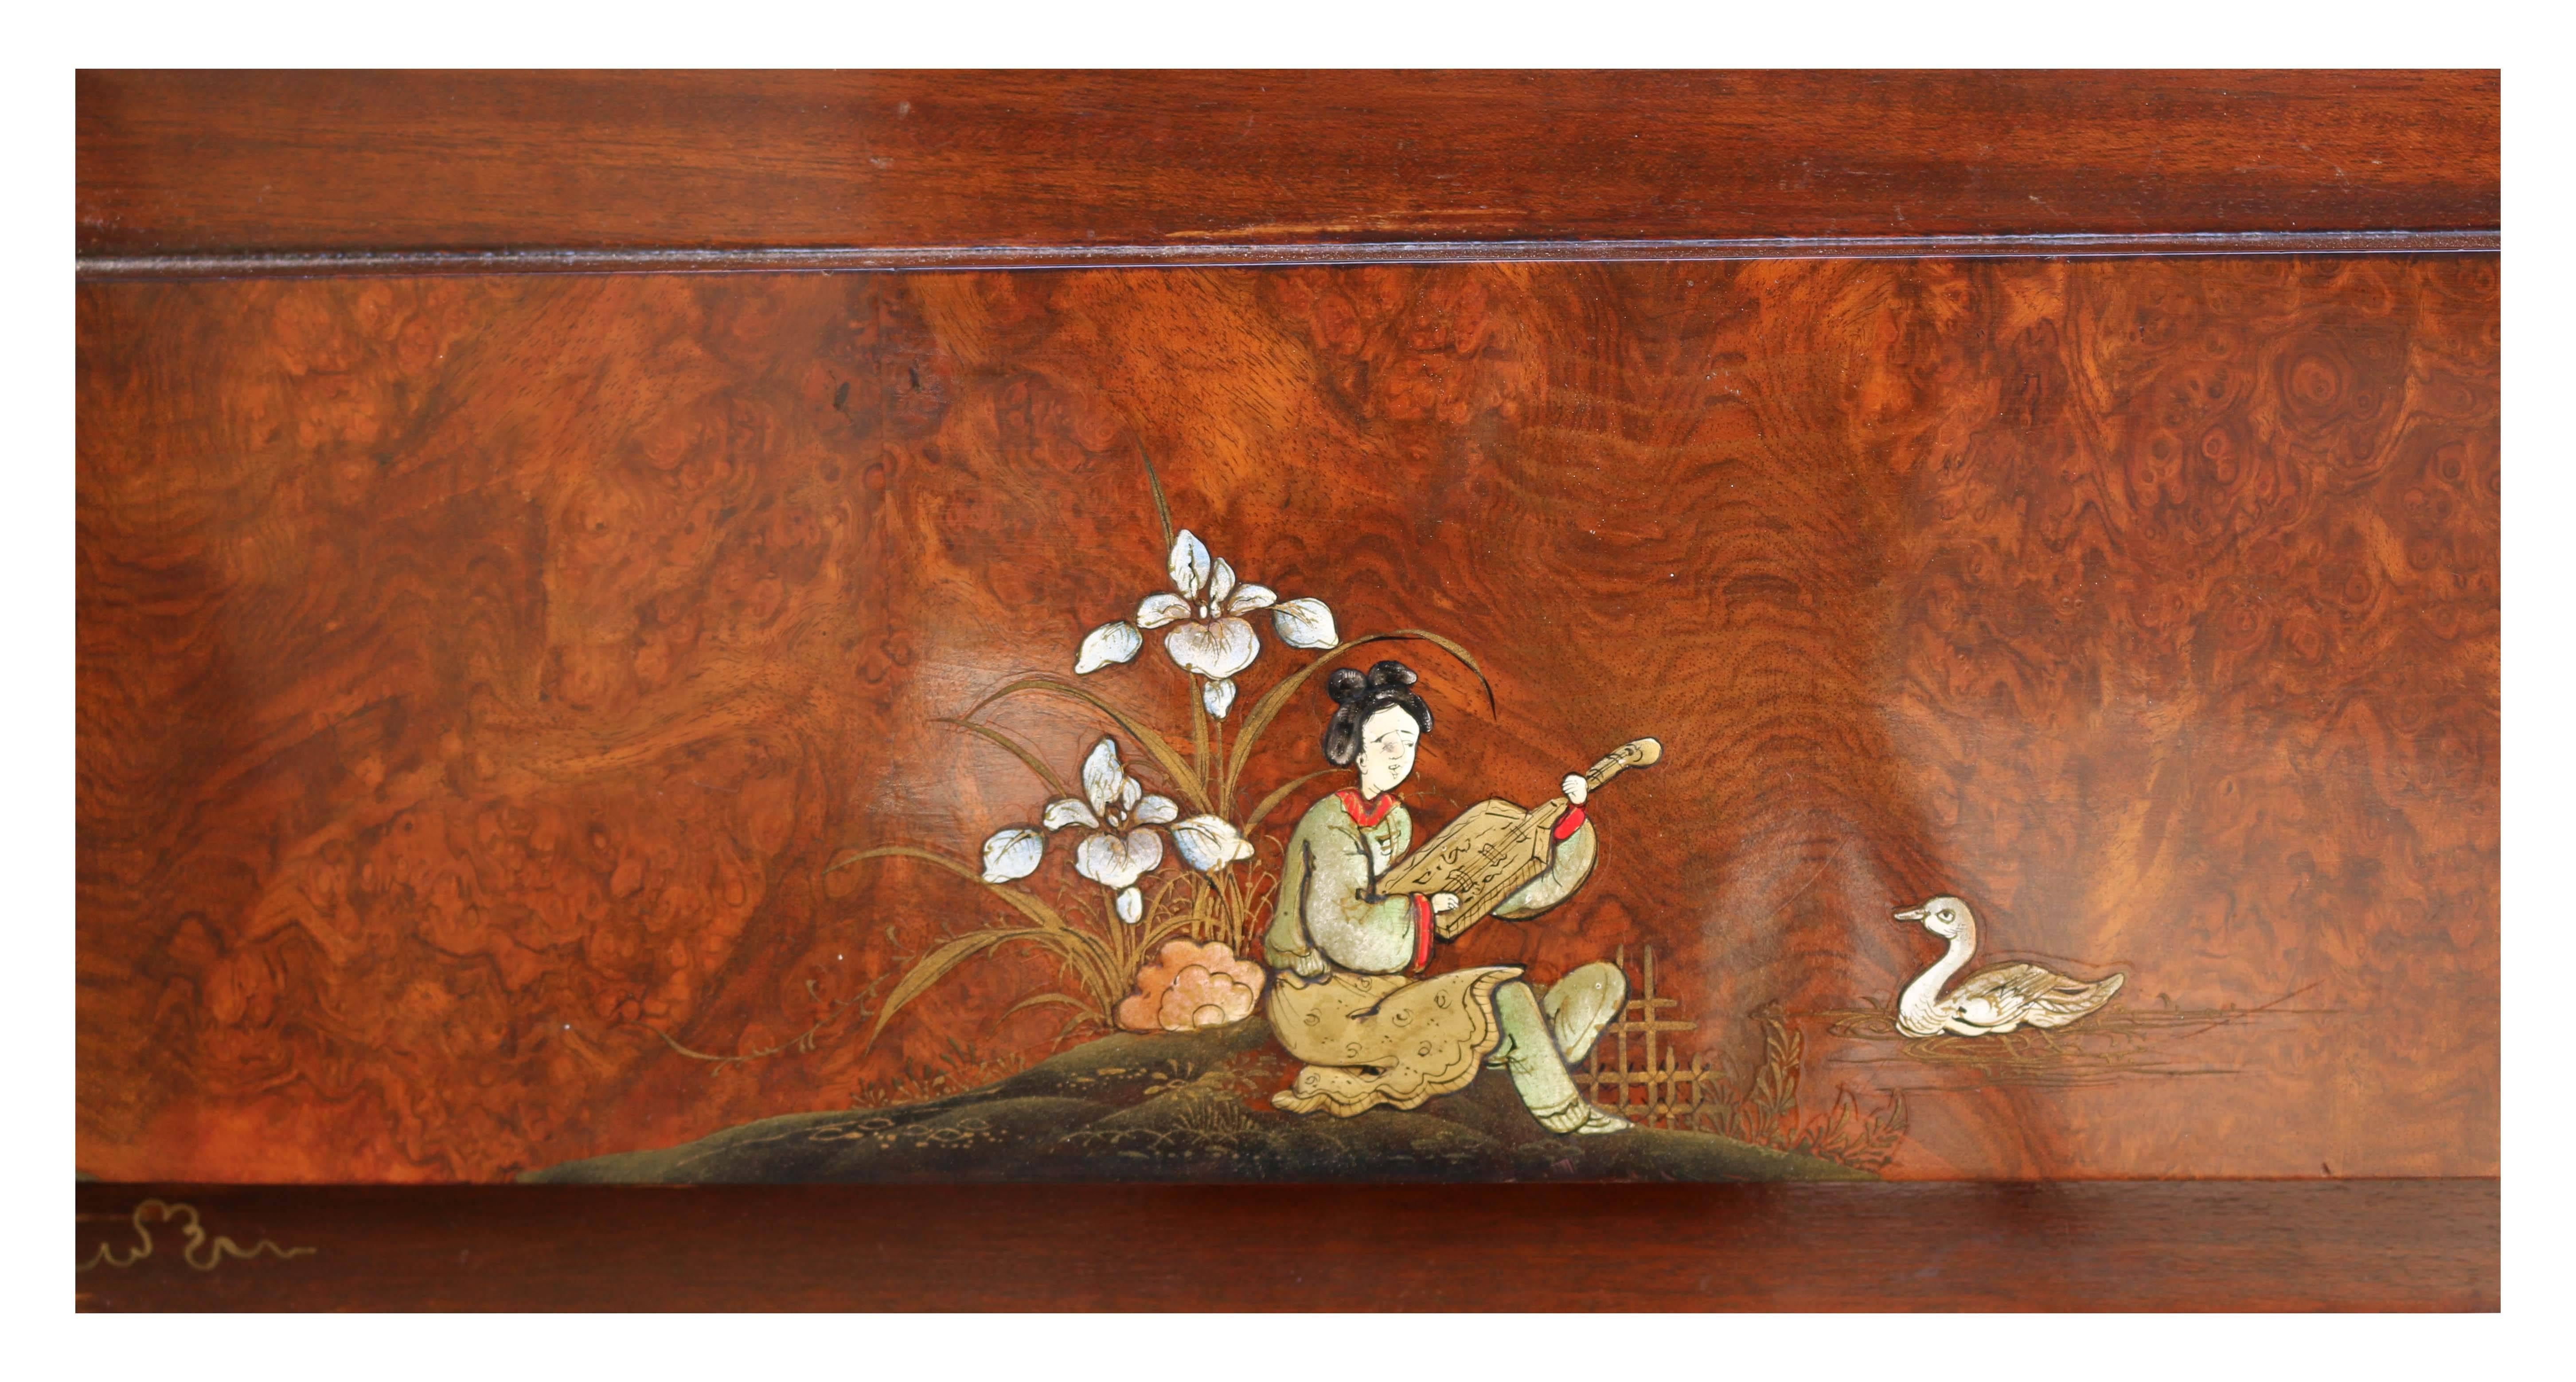 Burr walnut veneer with hand-painted decoration depicting Japanese scenes.

Opening H 84 x W 121 cm (33 x 47.5 inches).